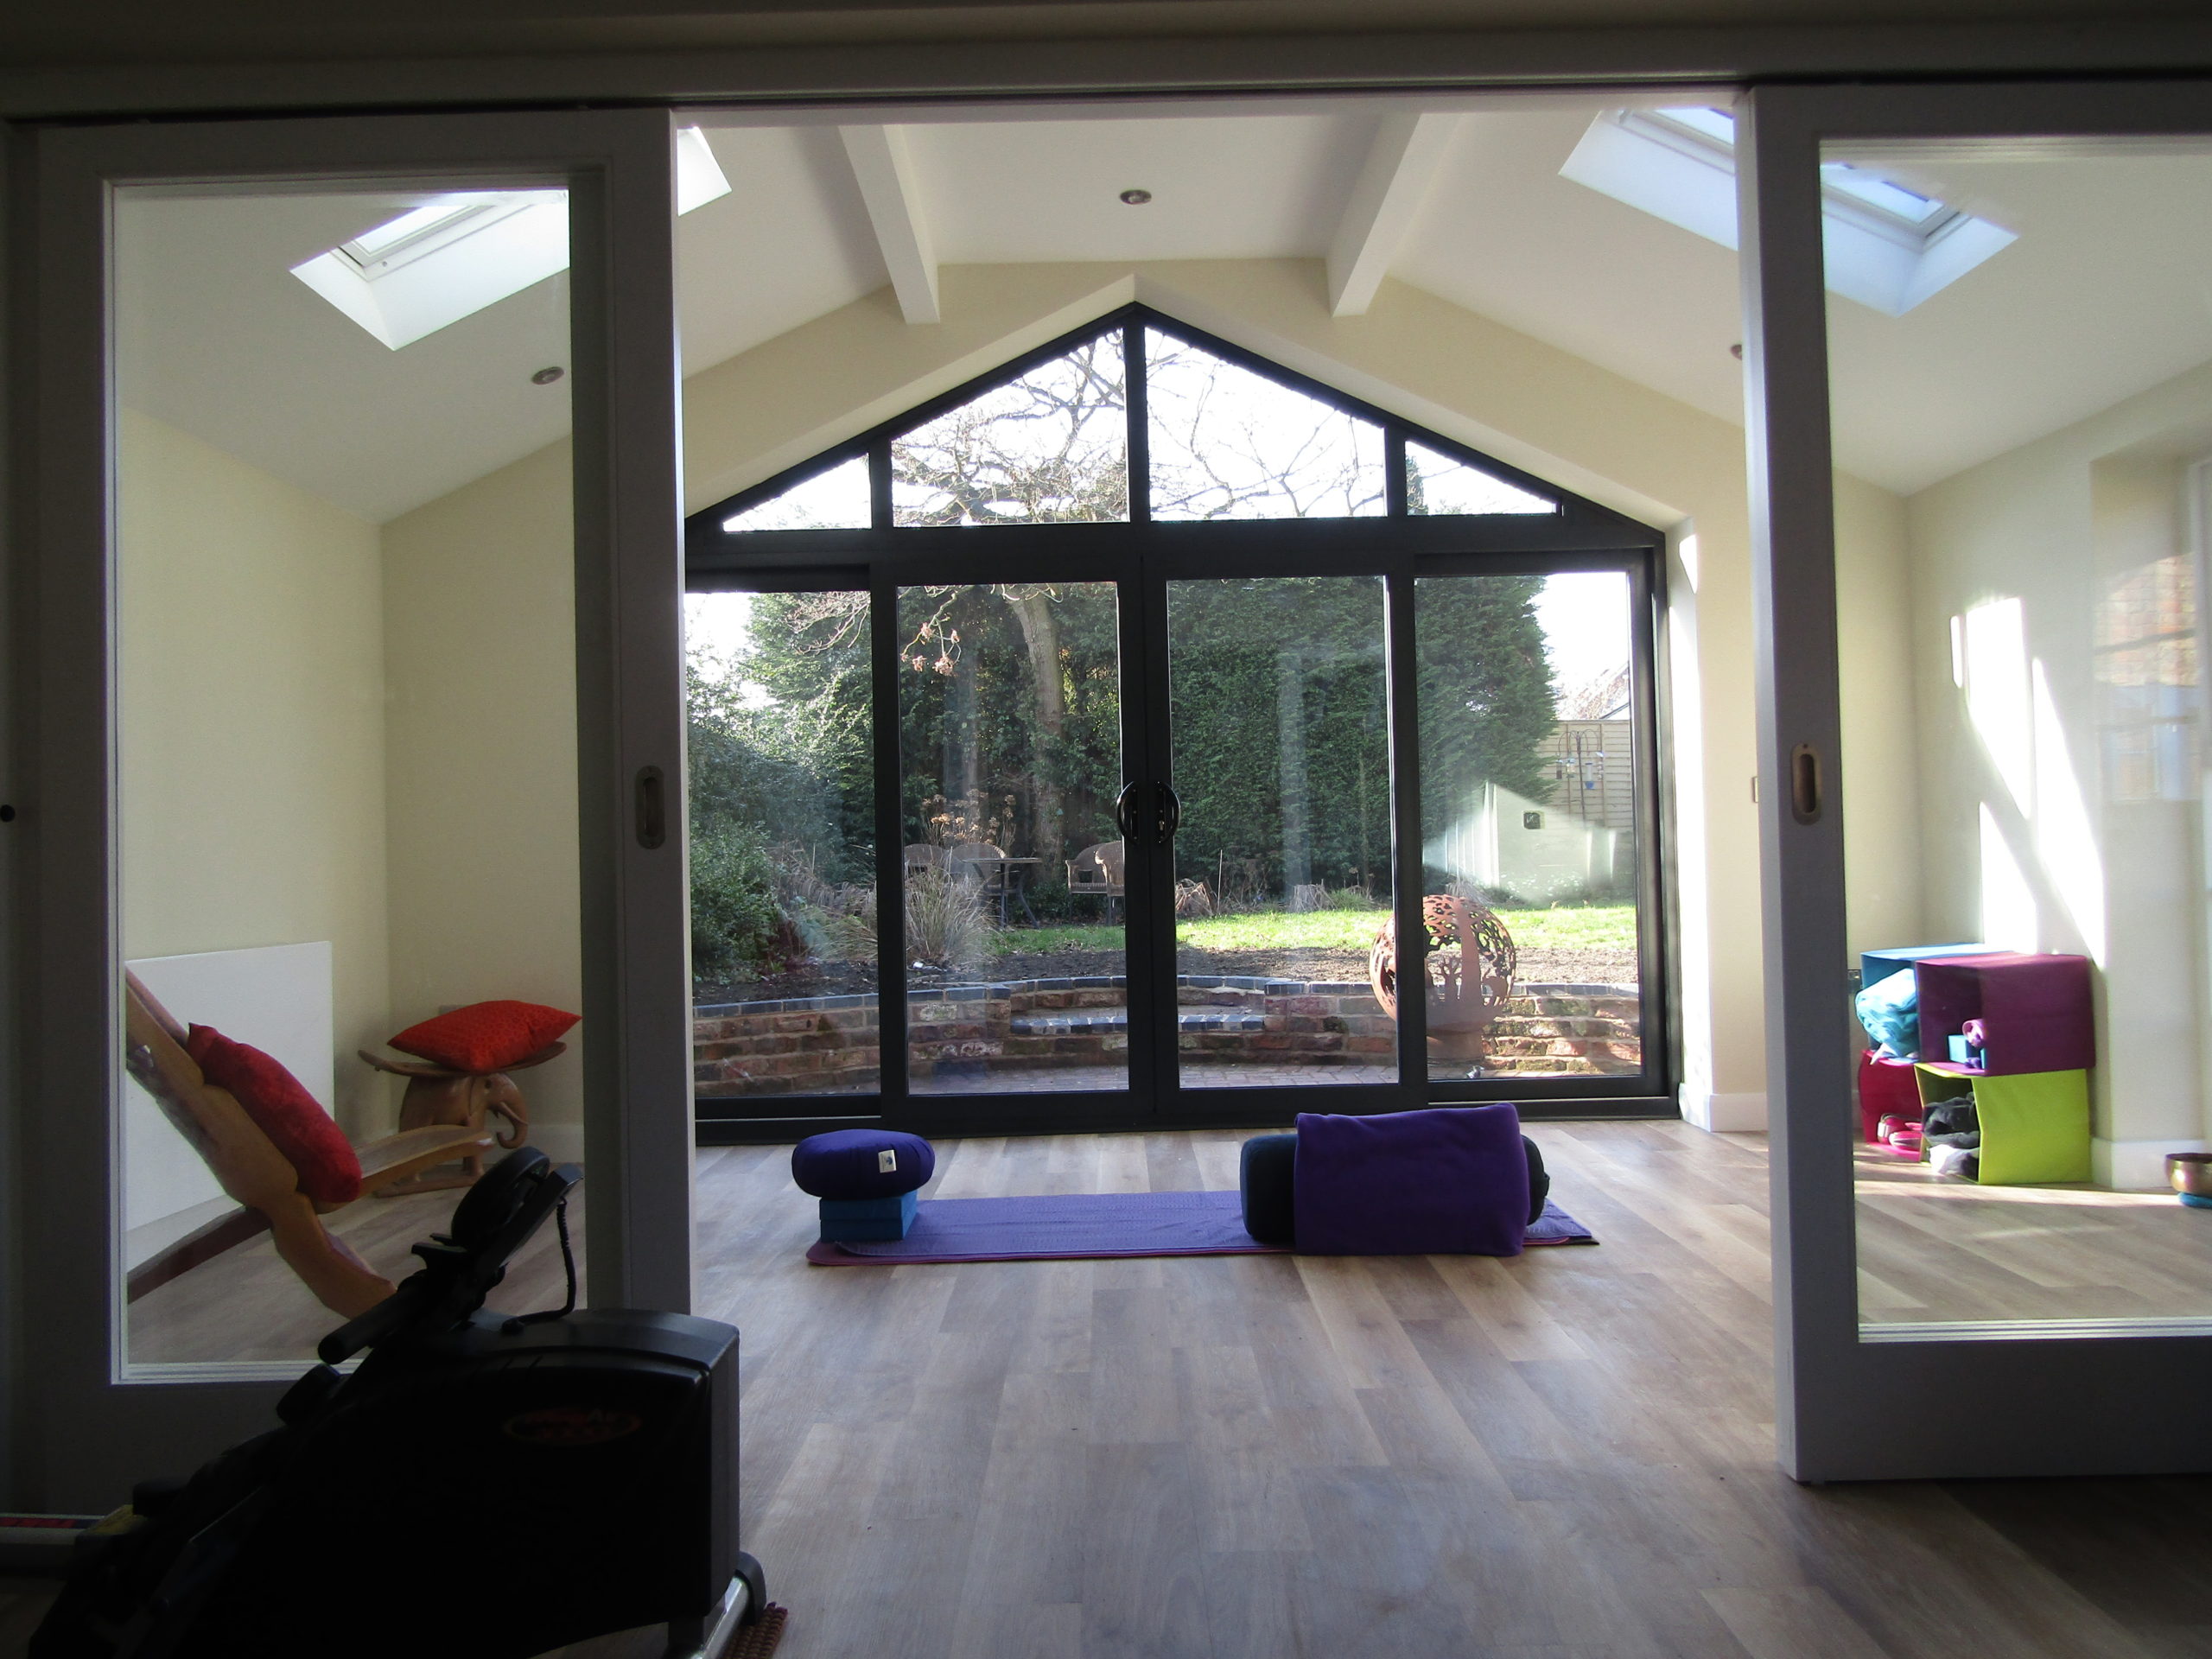 Spacious fitness centred garage conversion room.